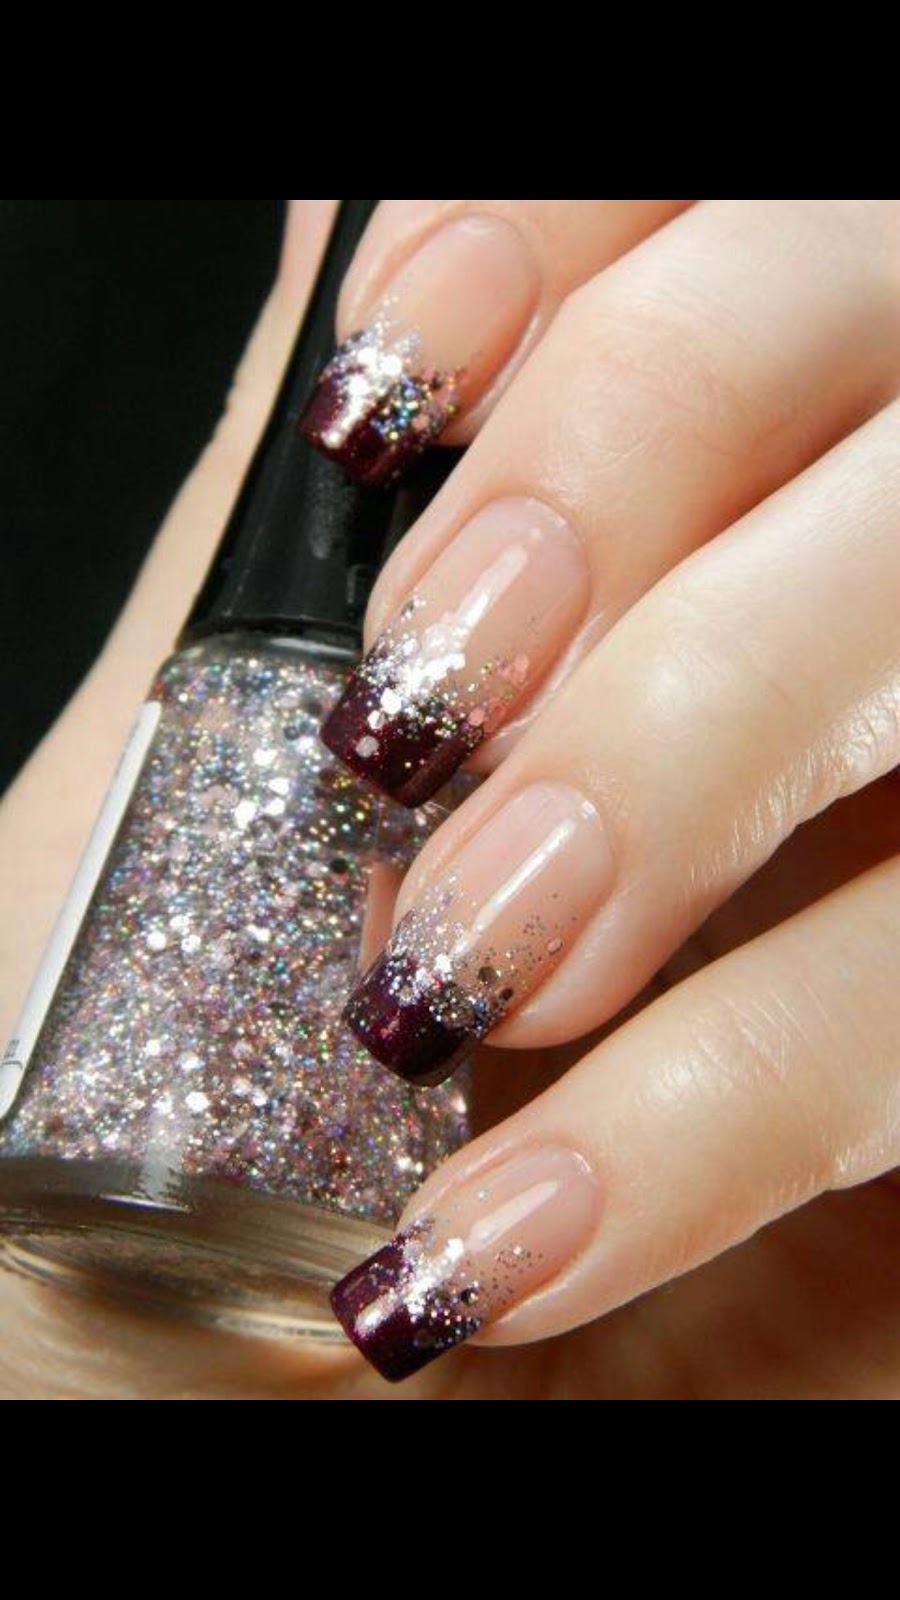 2Ns nails and spa | 12525 Beverly Blvd, Whittier, CA 90601 | Phone: (562) 832-0444